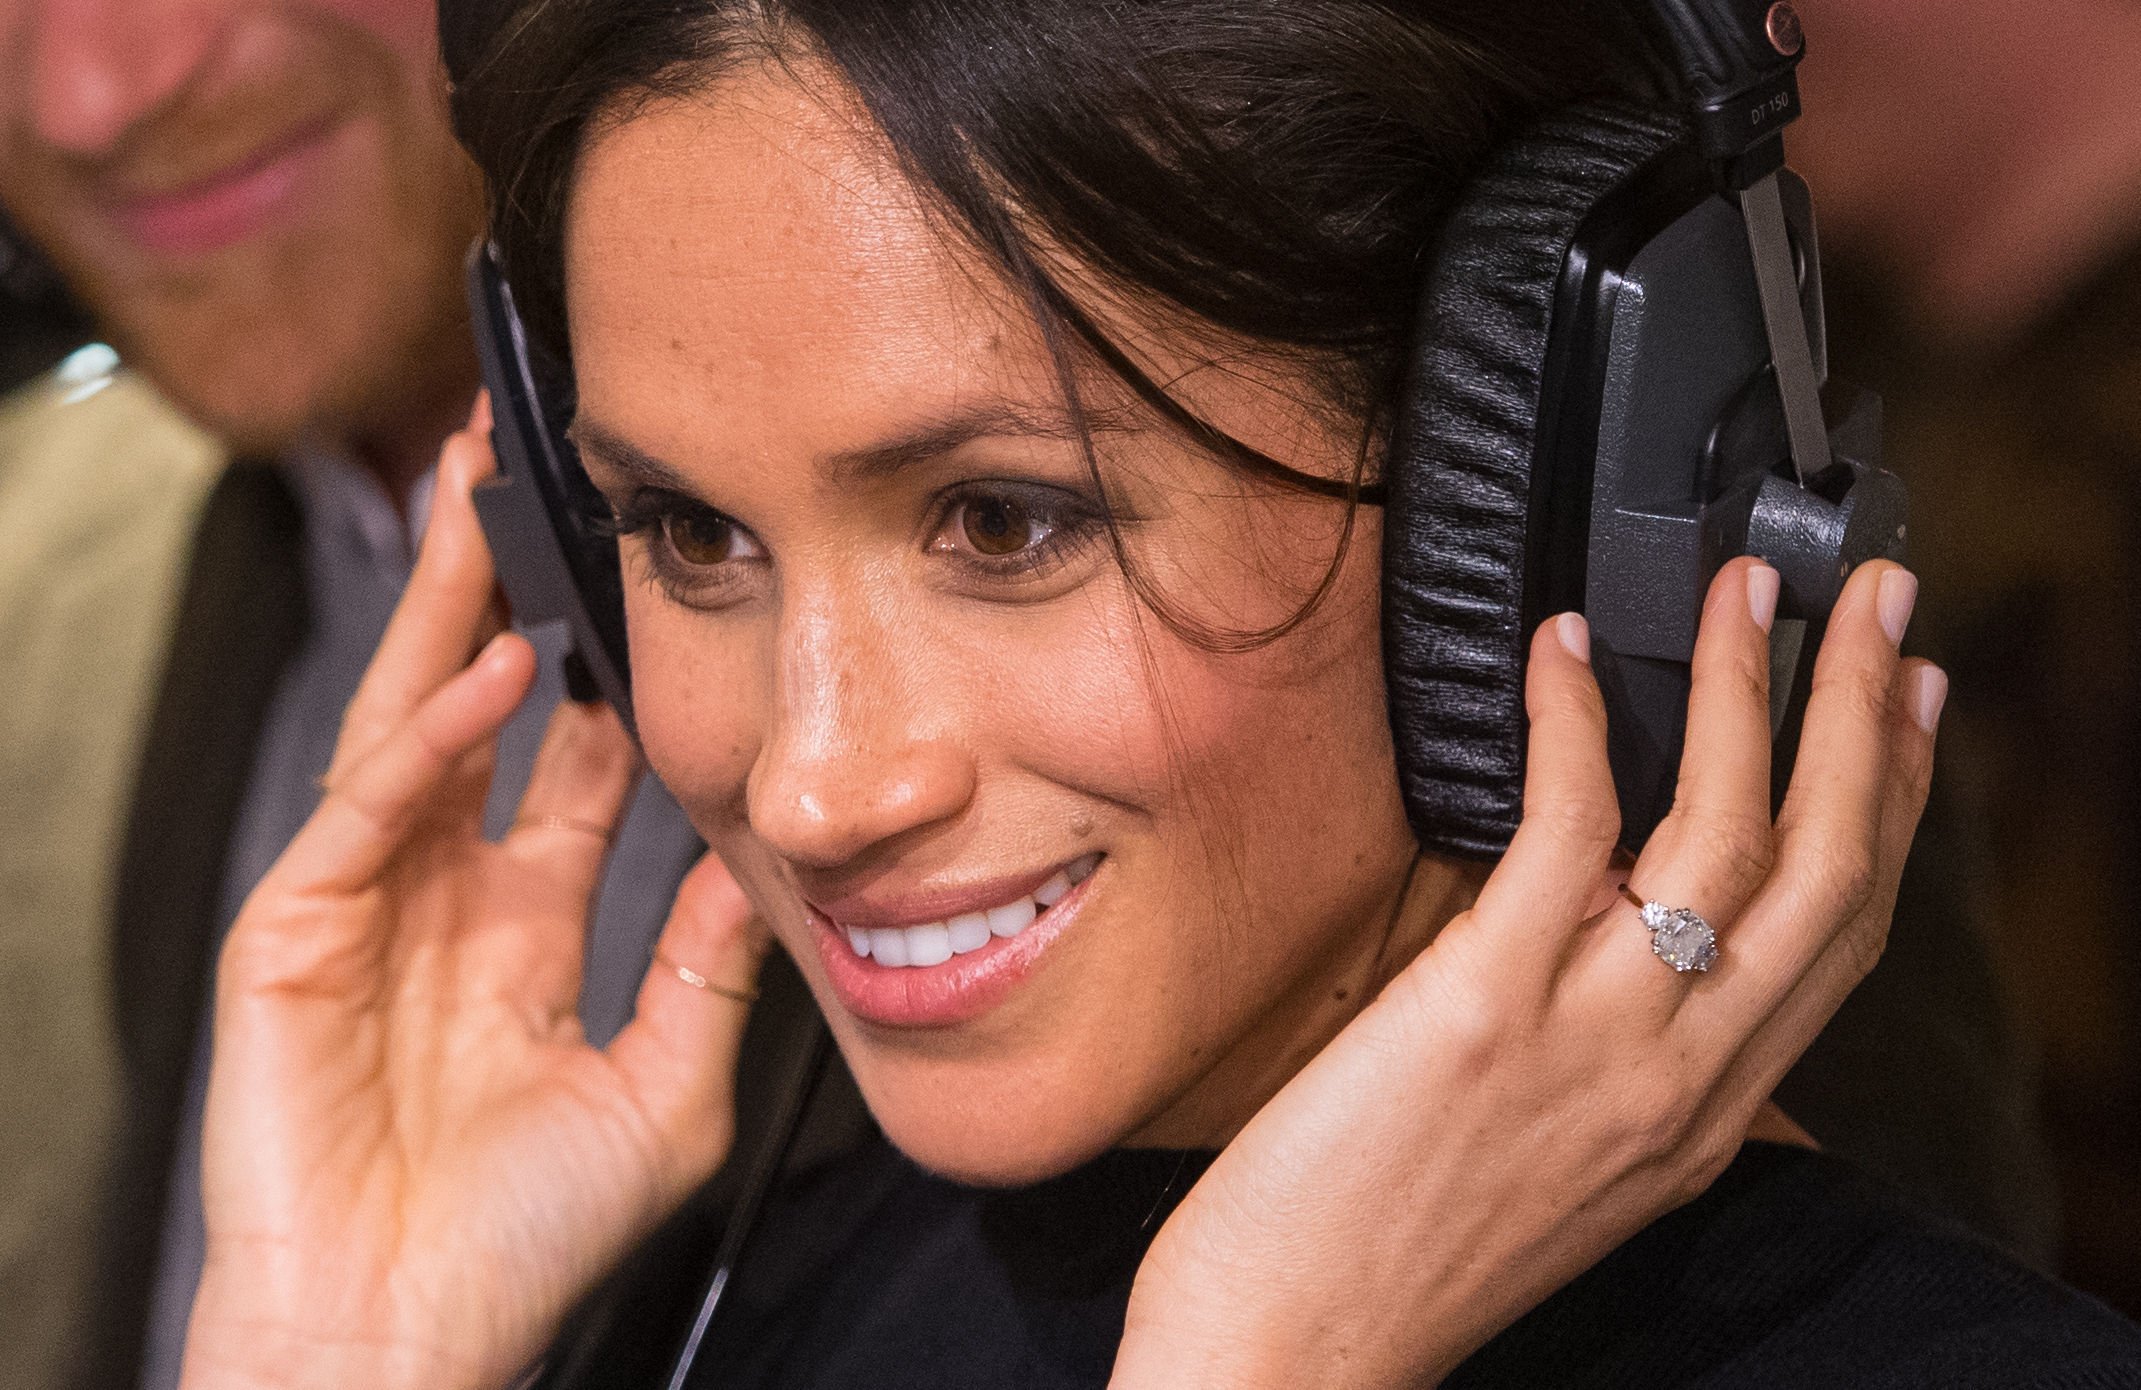 Meghan Markle’s Podcast Guide: ‘Archetypes’ History, Episode List, and Meghan’s New Podcast